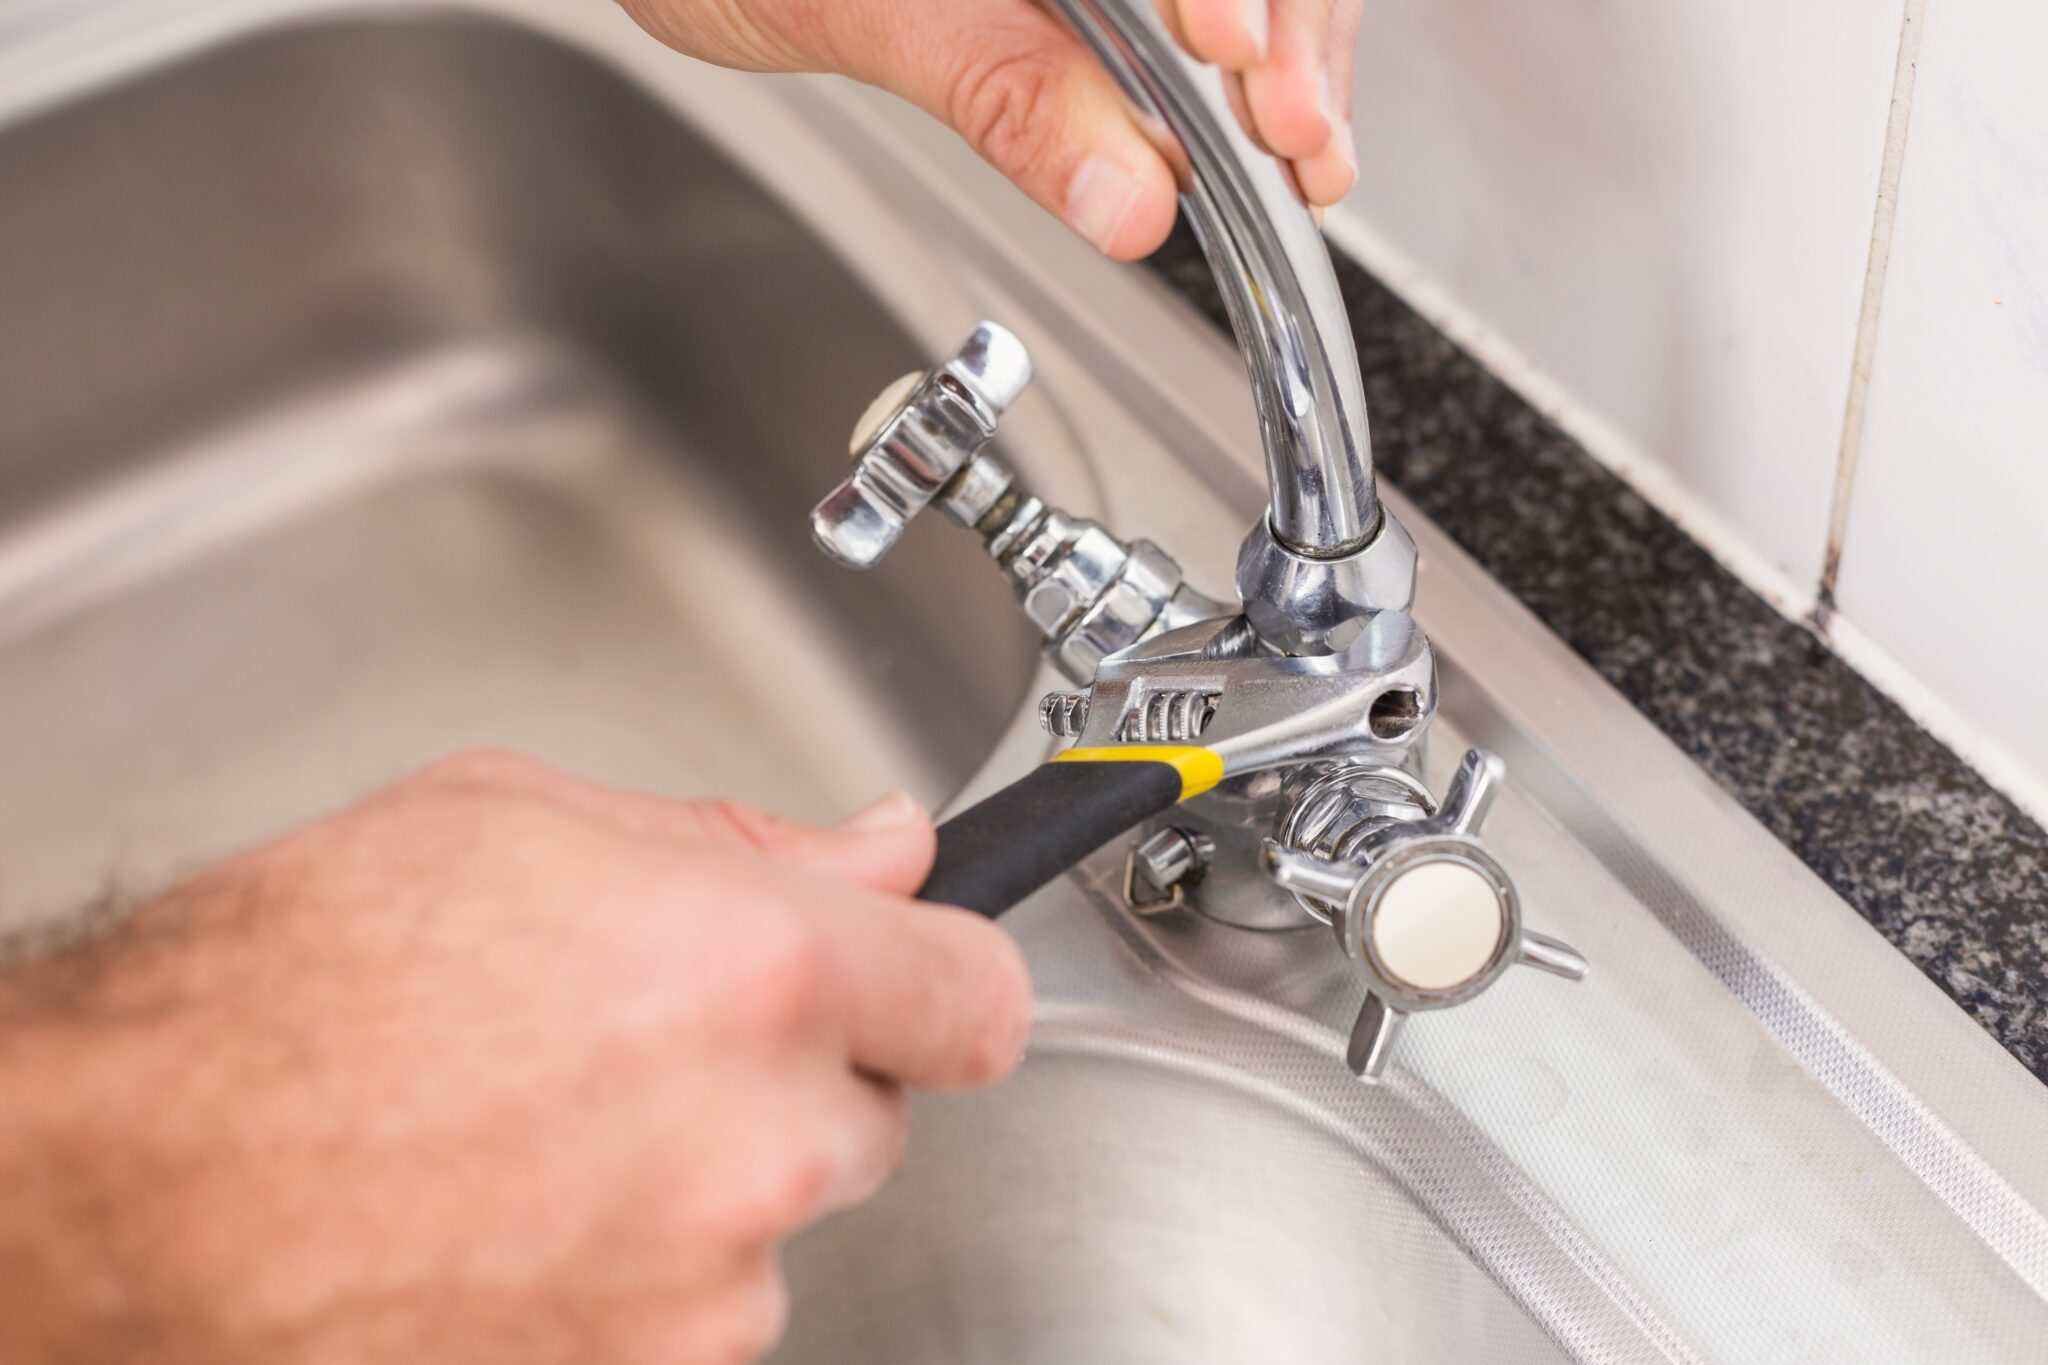 How to fix a leaking bathroom tap